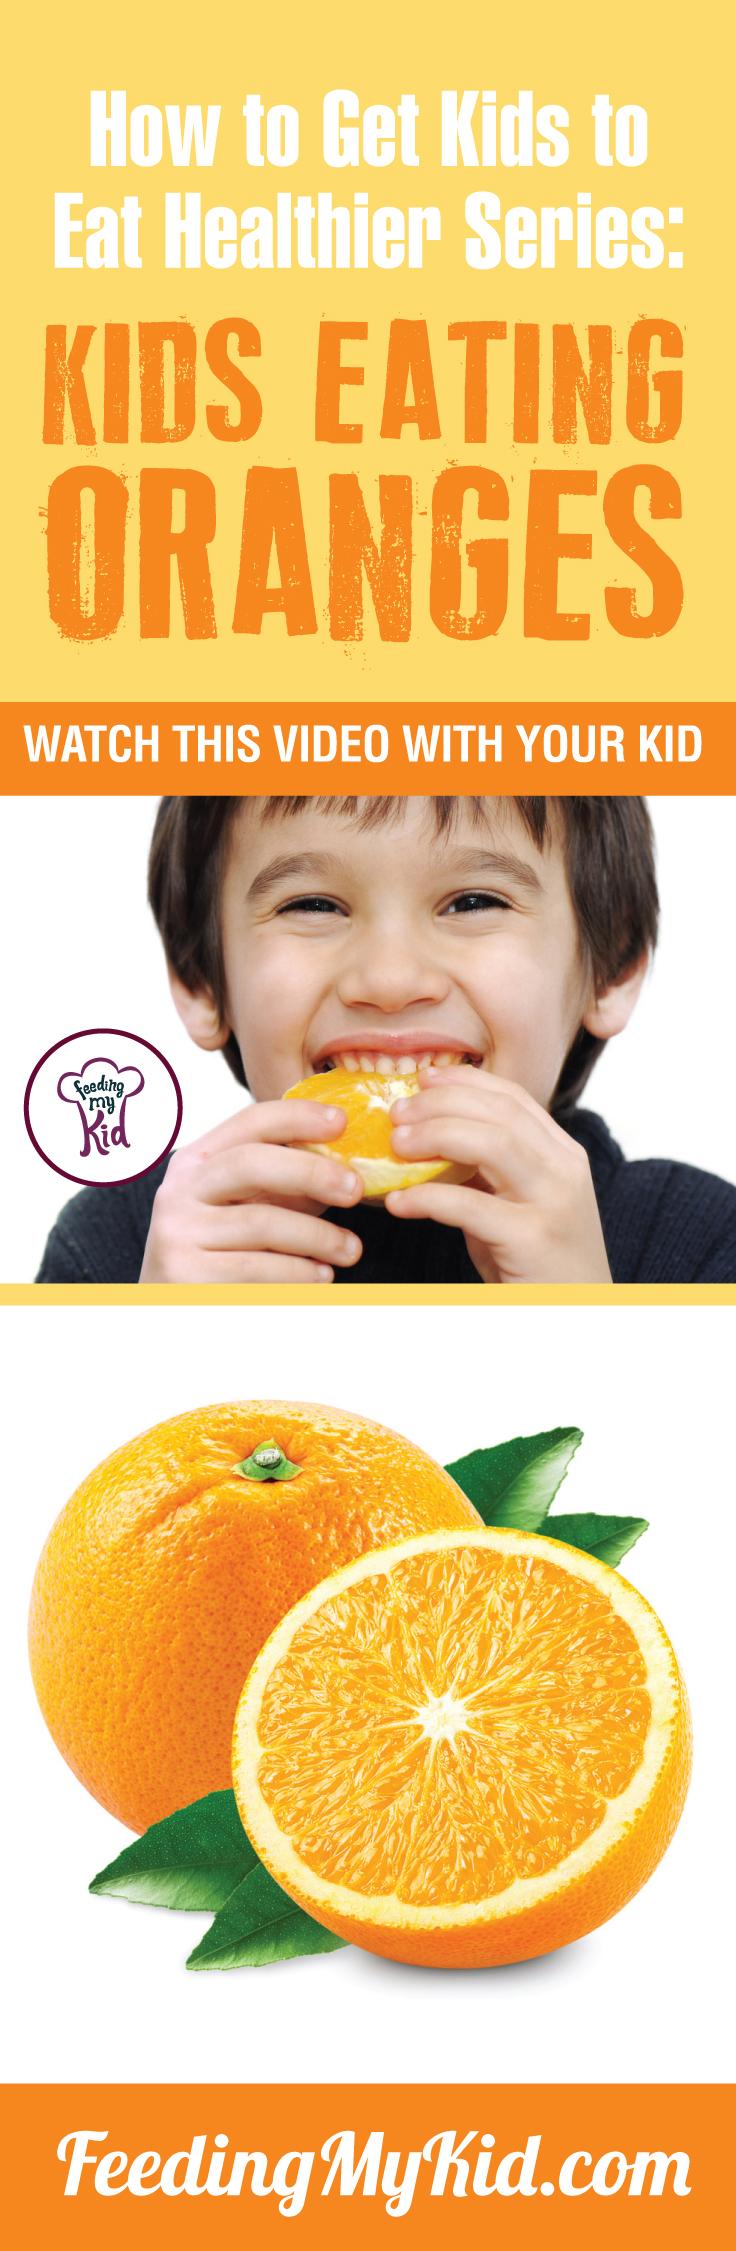 How to Get Kids to Eat Healthier Series: Kids Eating Oranges